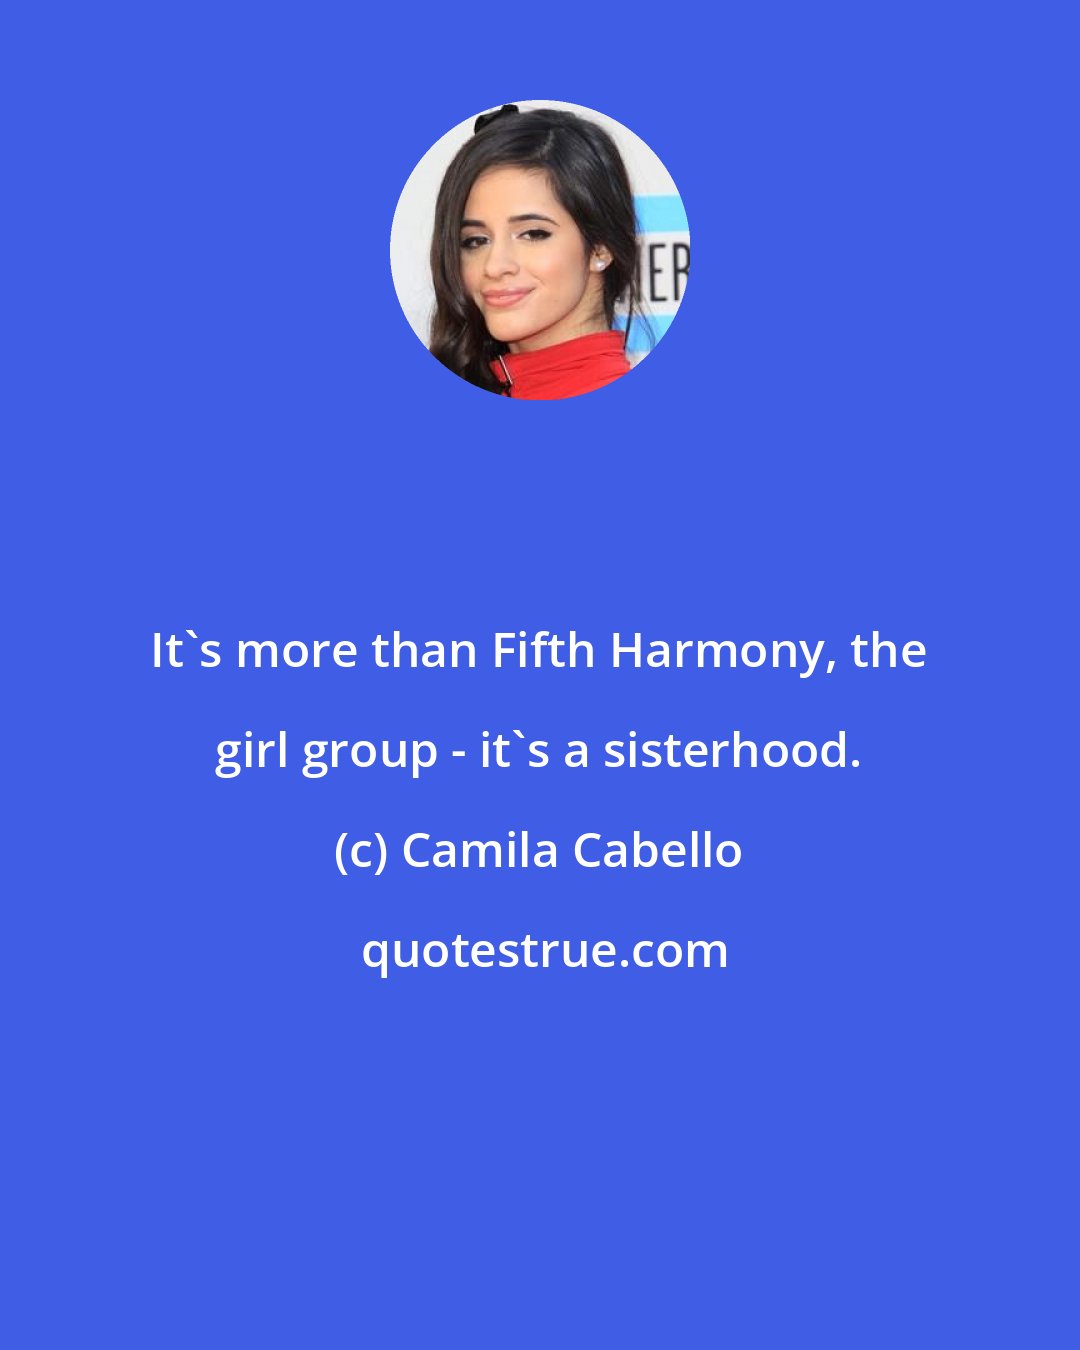 Camila Cabello: It's more than Fifth Harmony, the girl group - it's a sisterhood.